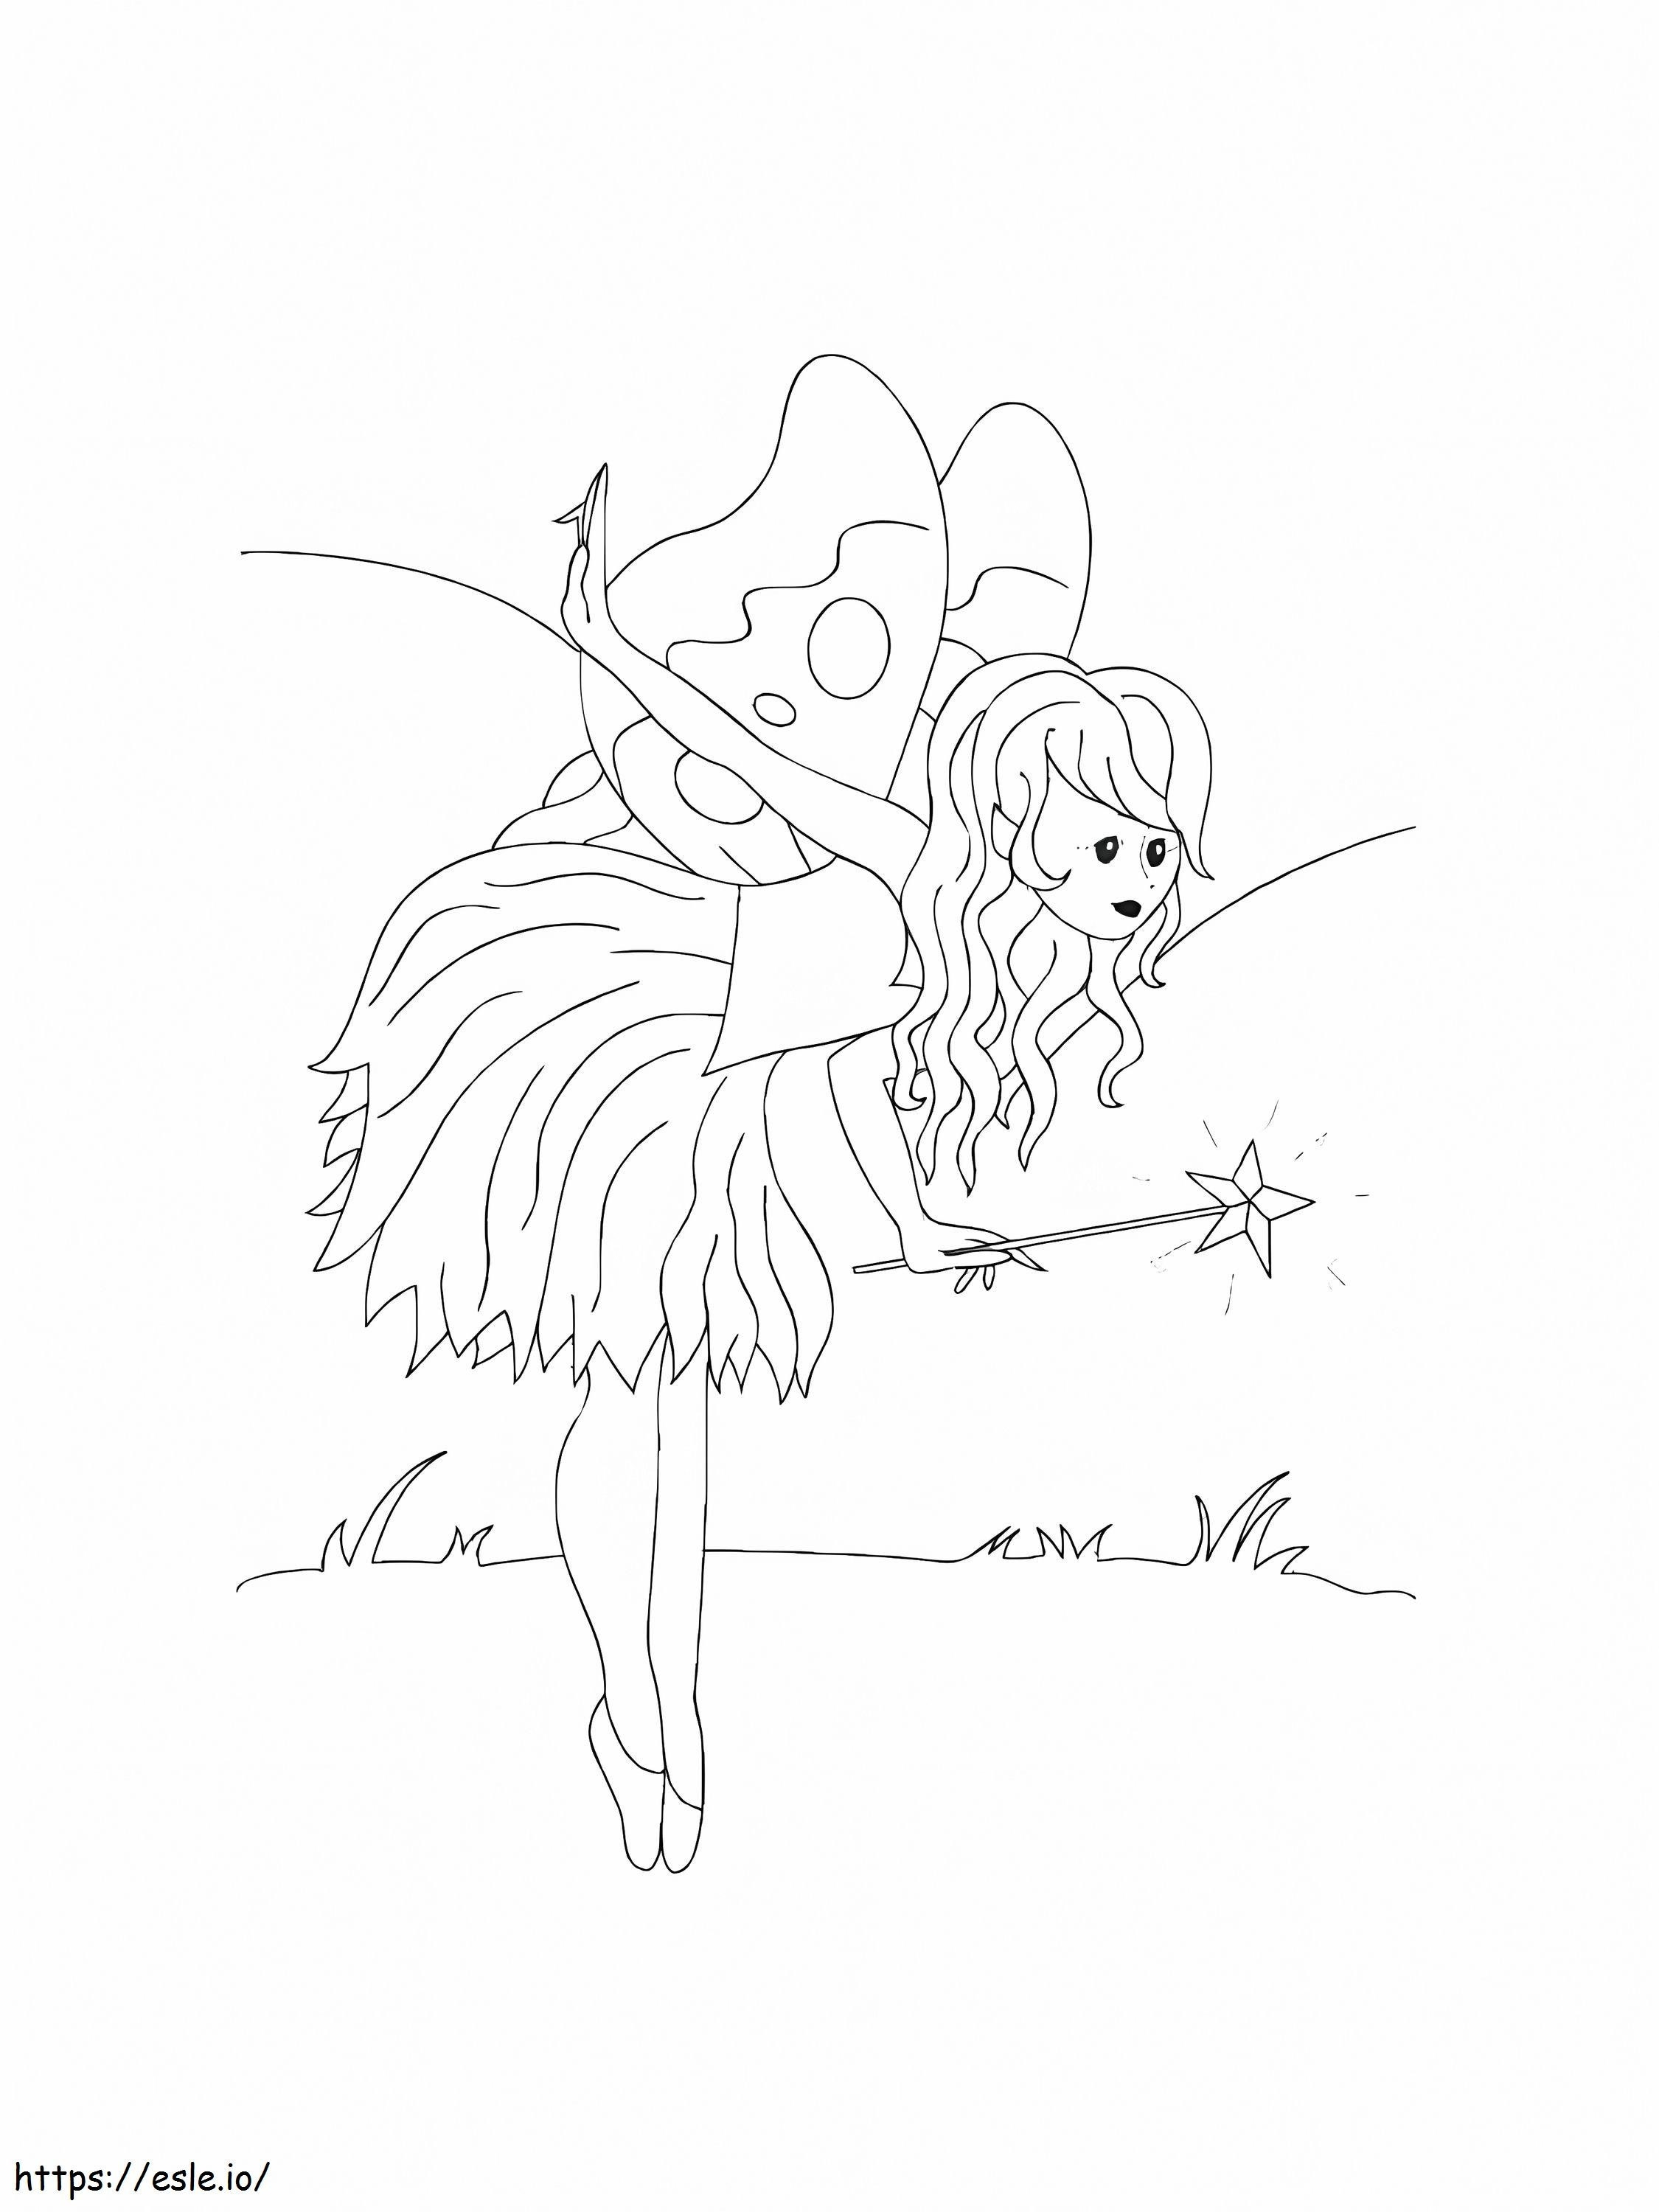 Basic Fairy With Magic Wand coloring page